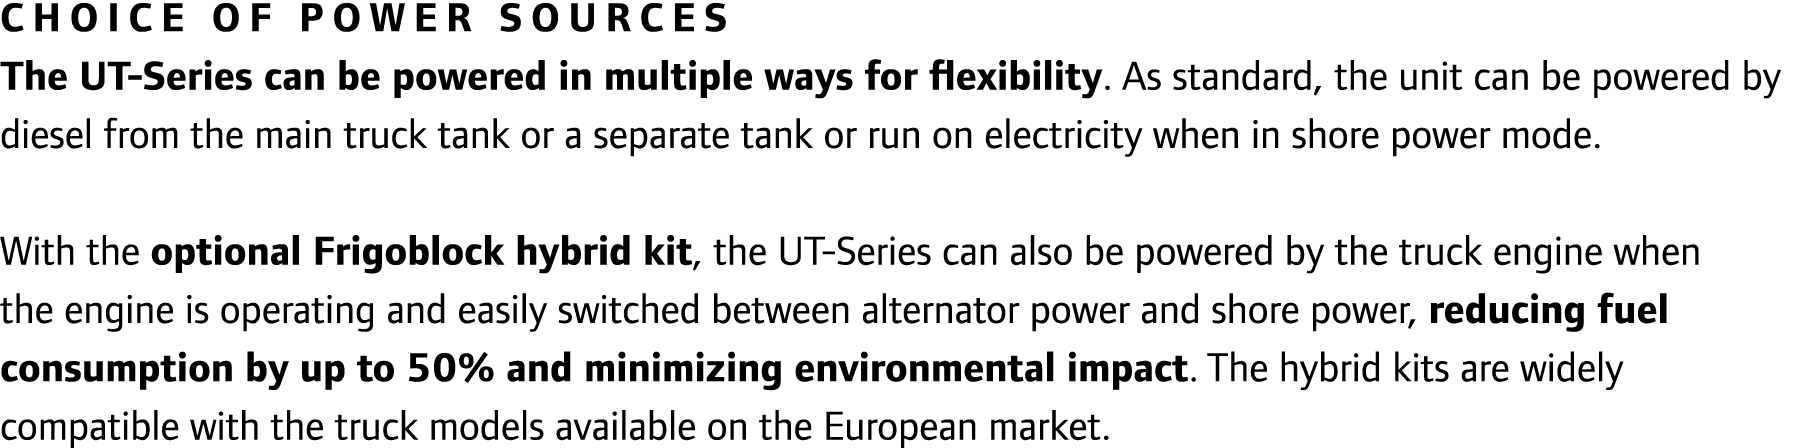 Choice of power sources The UT-Series can be powered in multiple ways for flexibility. As standard, the unit can be p...